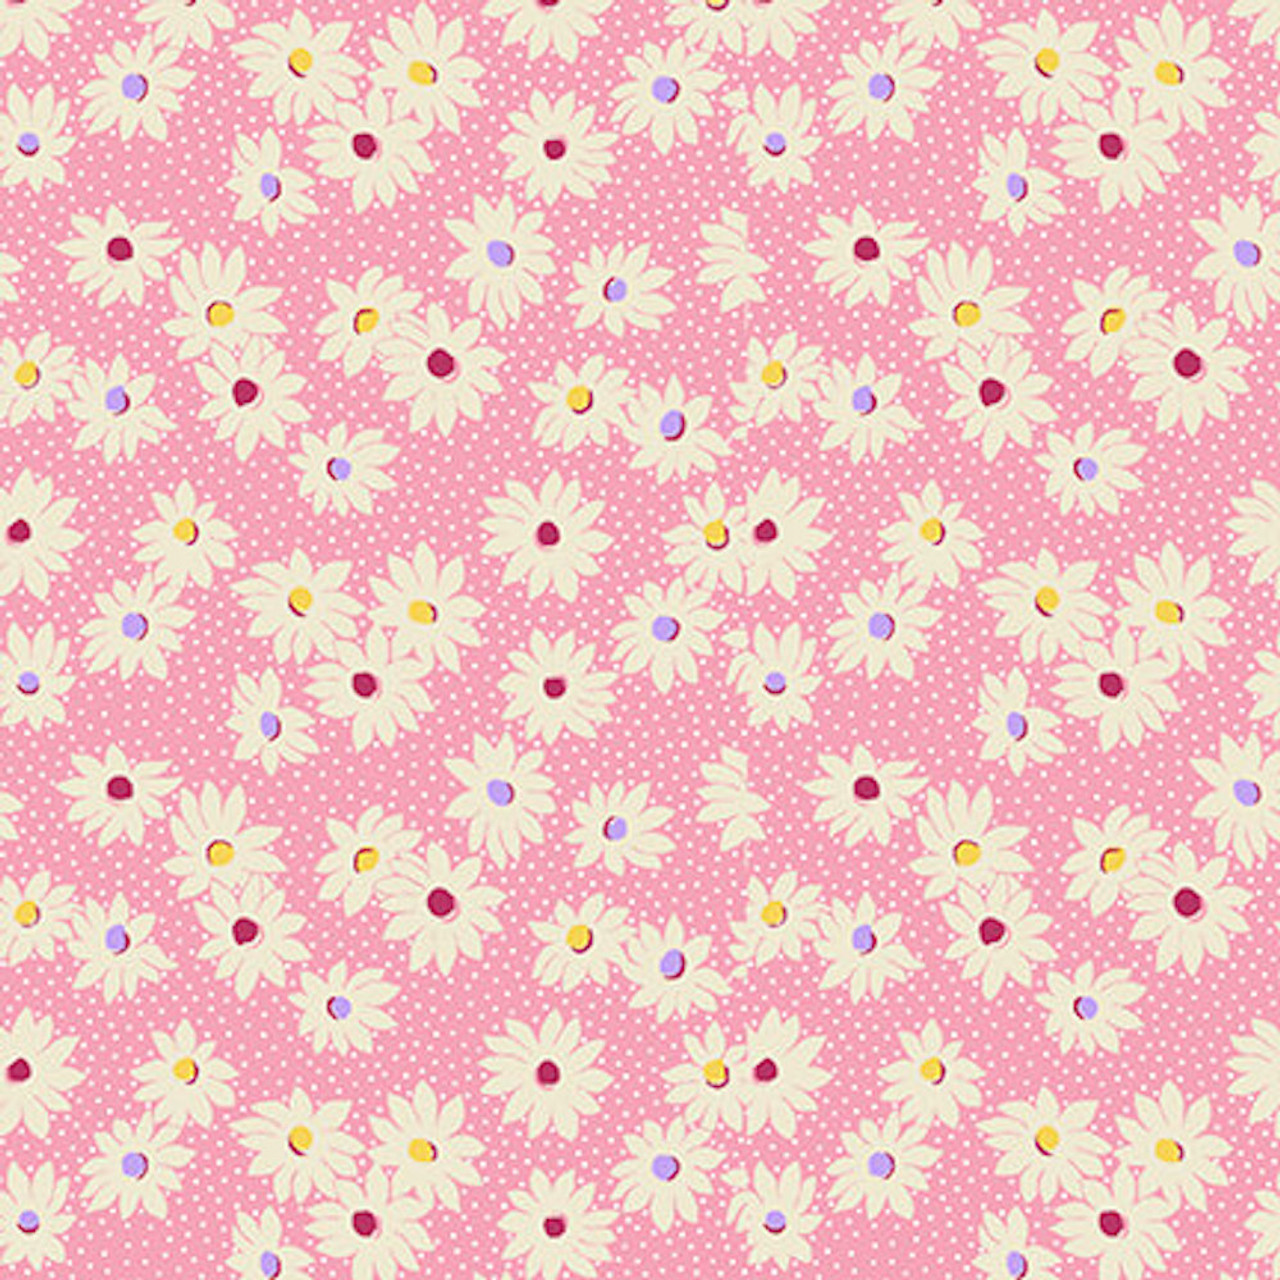 Henry Glass Nana Mae VI Med Daisies Pink Cotton Fabric By The Yard